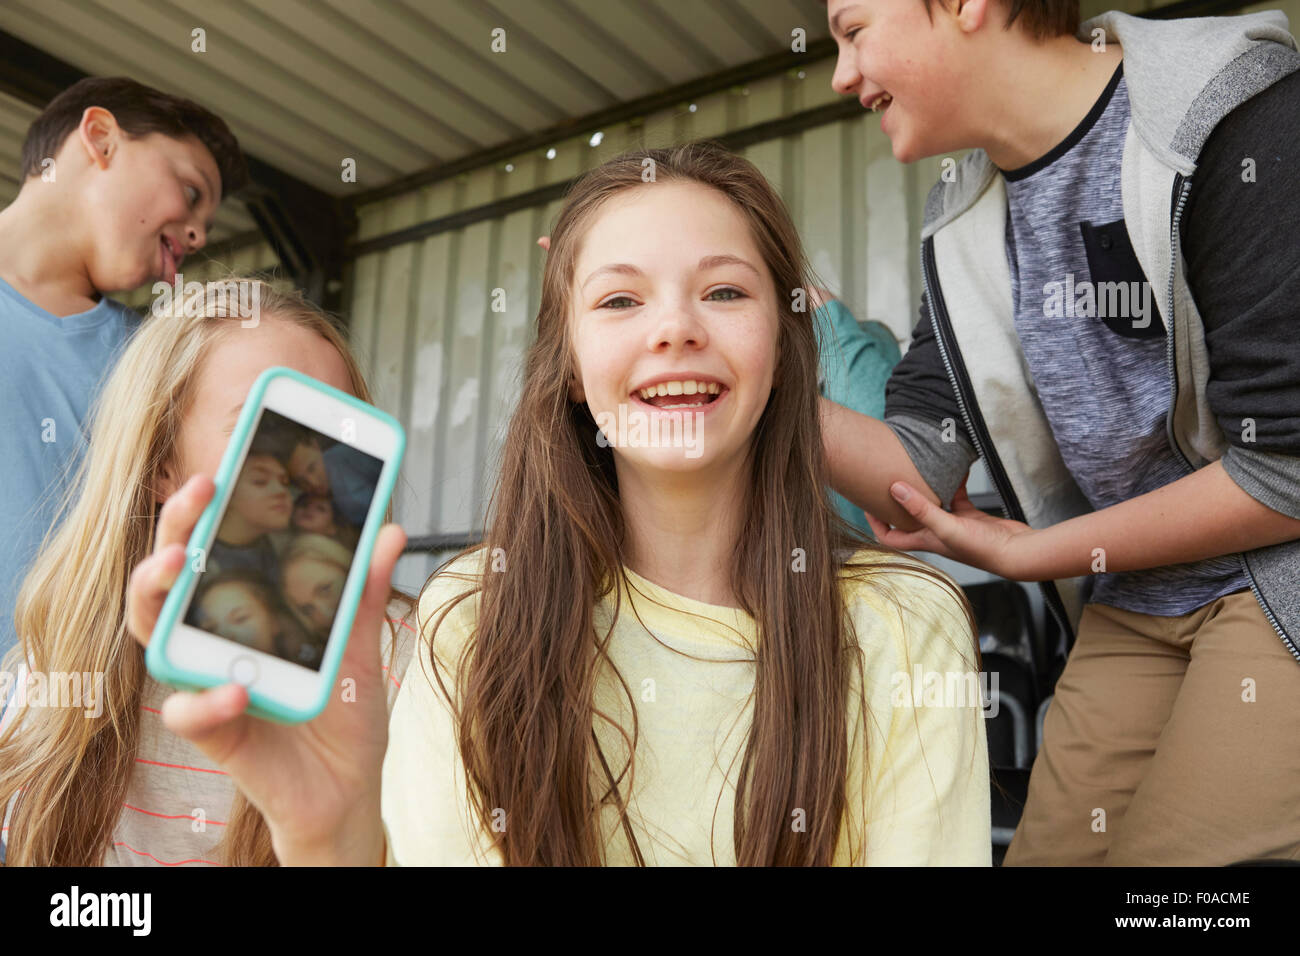 Girl holding up smartphone selfie of friends in shelter Stock Photo